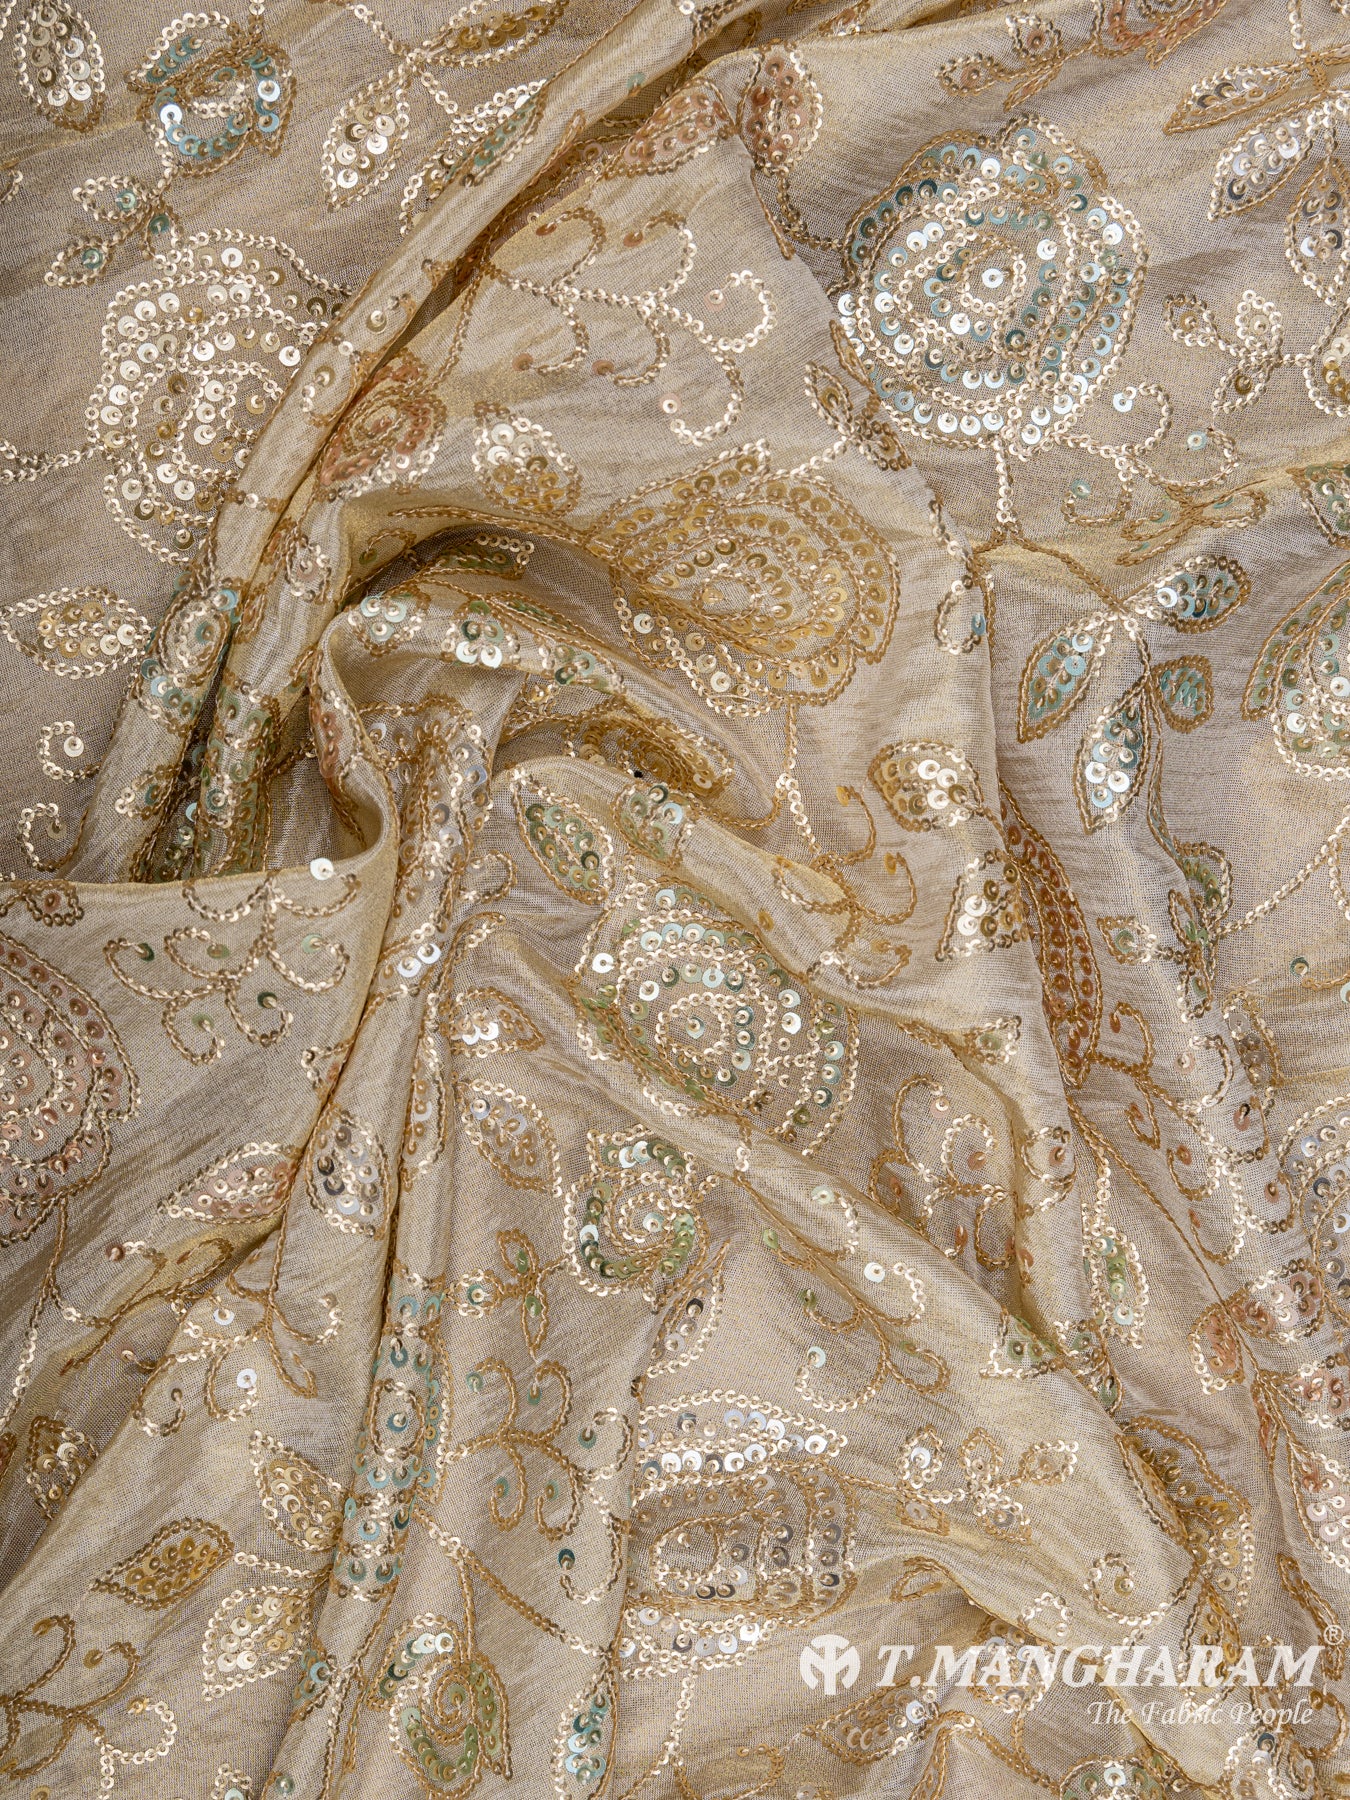 Beige Tissue Embroidery Fabric - EB4874 view-4